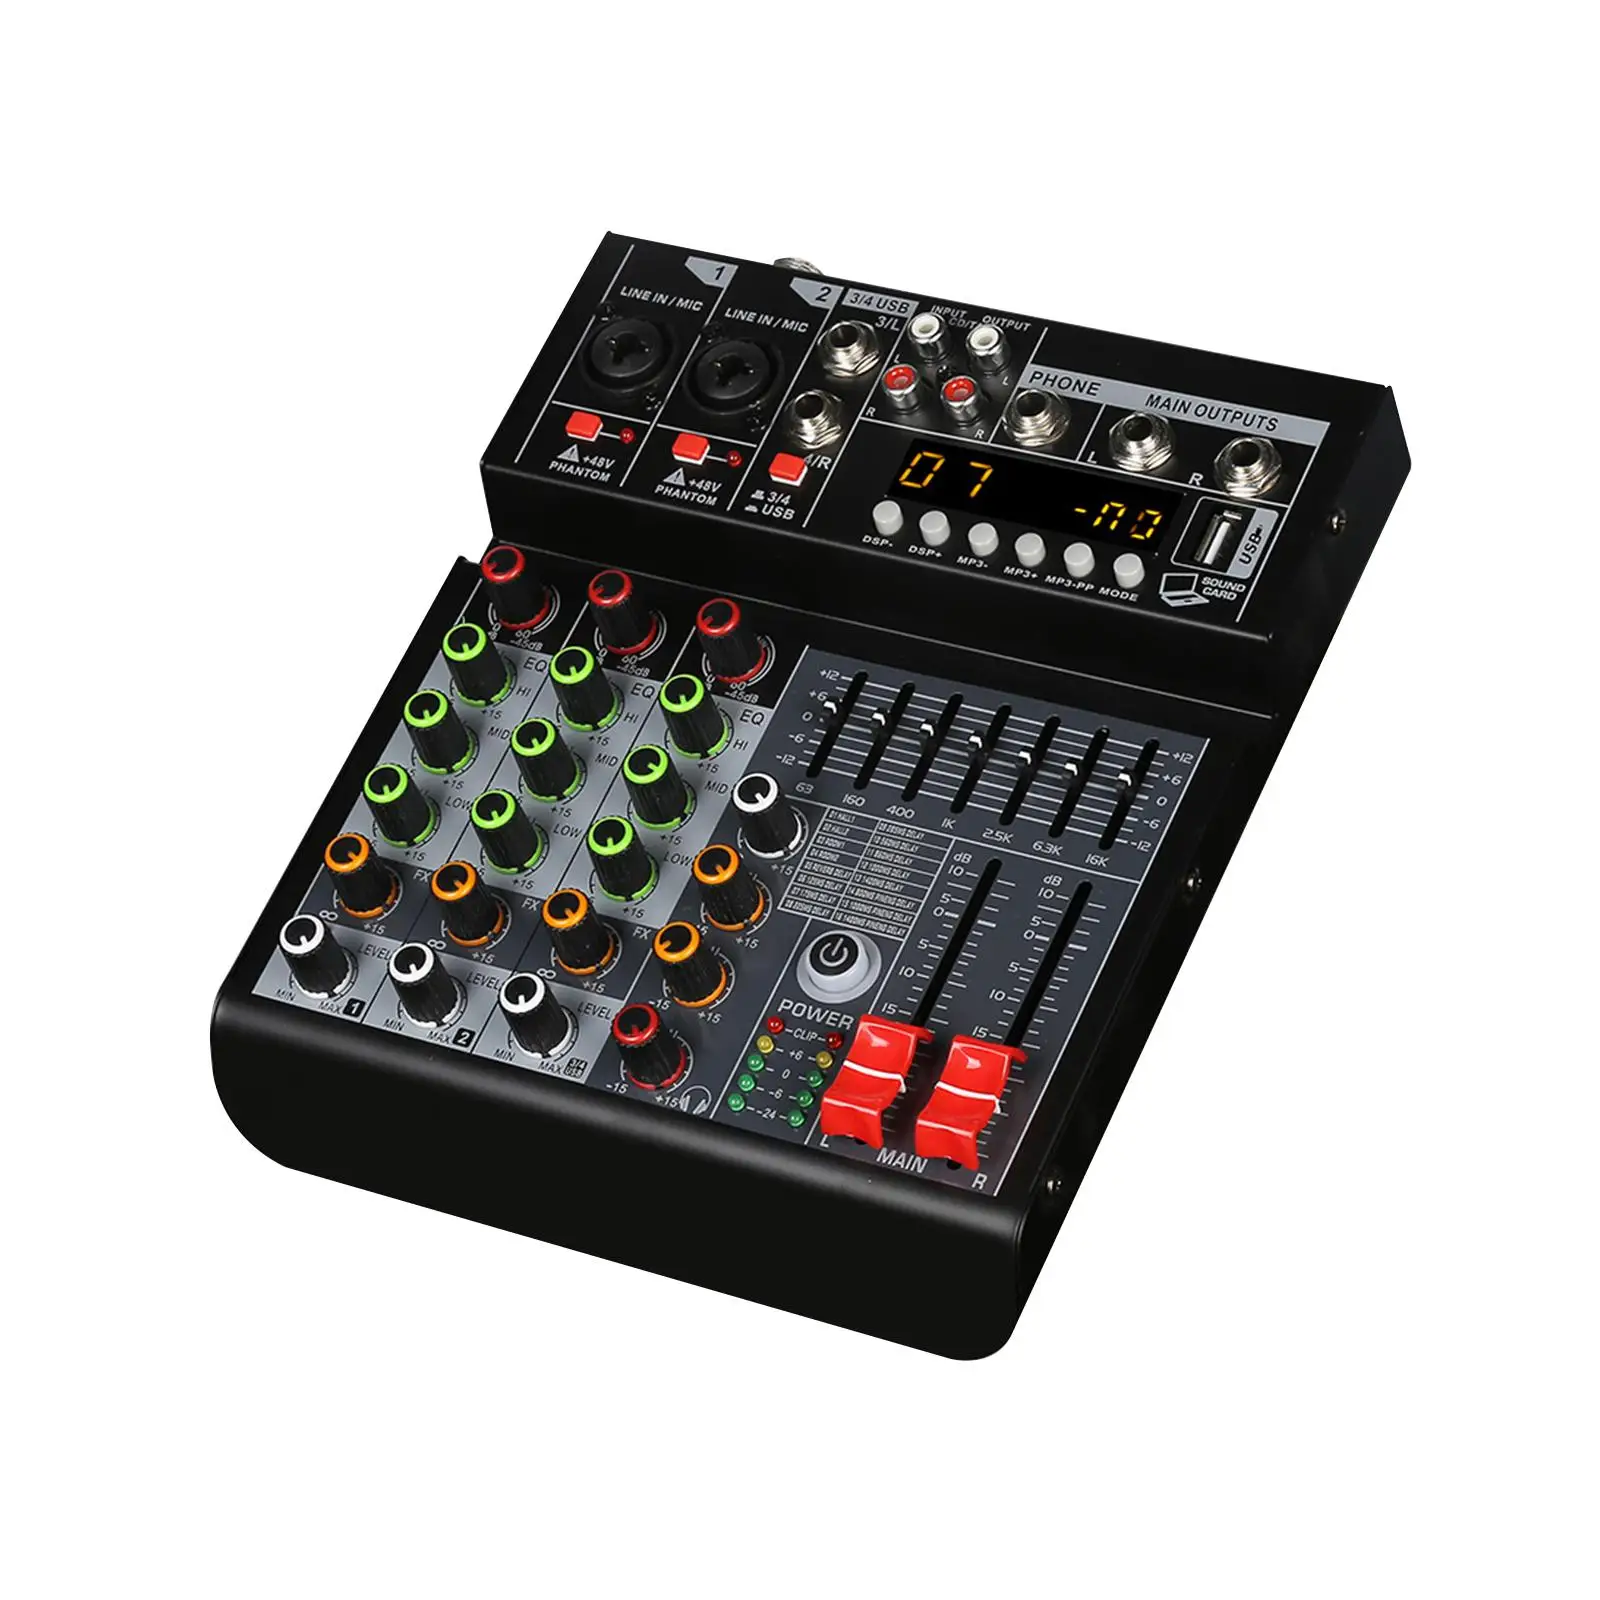 4 Channel Mixer Sound Mixing Console Digital Mixer AUX Instant Listening Real Time Recording Karaoke Music Portable EU Adapter